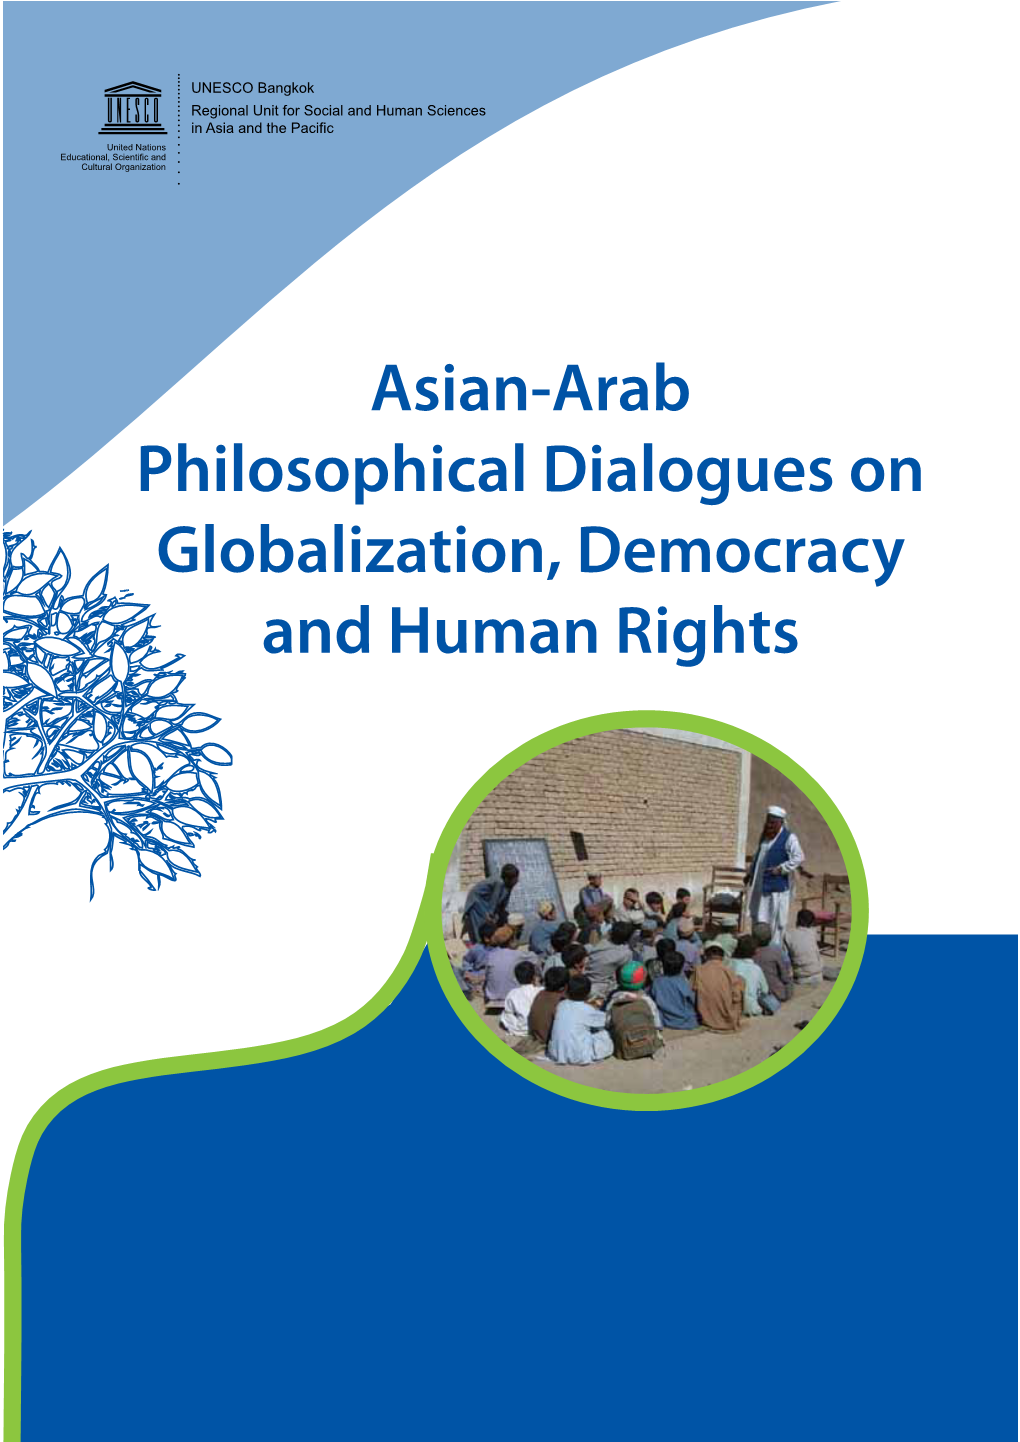 Asian-Arab Philosophical Dialogues on Globalization, Democracy and Human Rights Asian-Arab Philosophical Dialogues on Globalization, Democracy and Human Rights